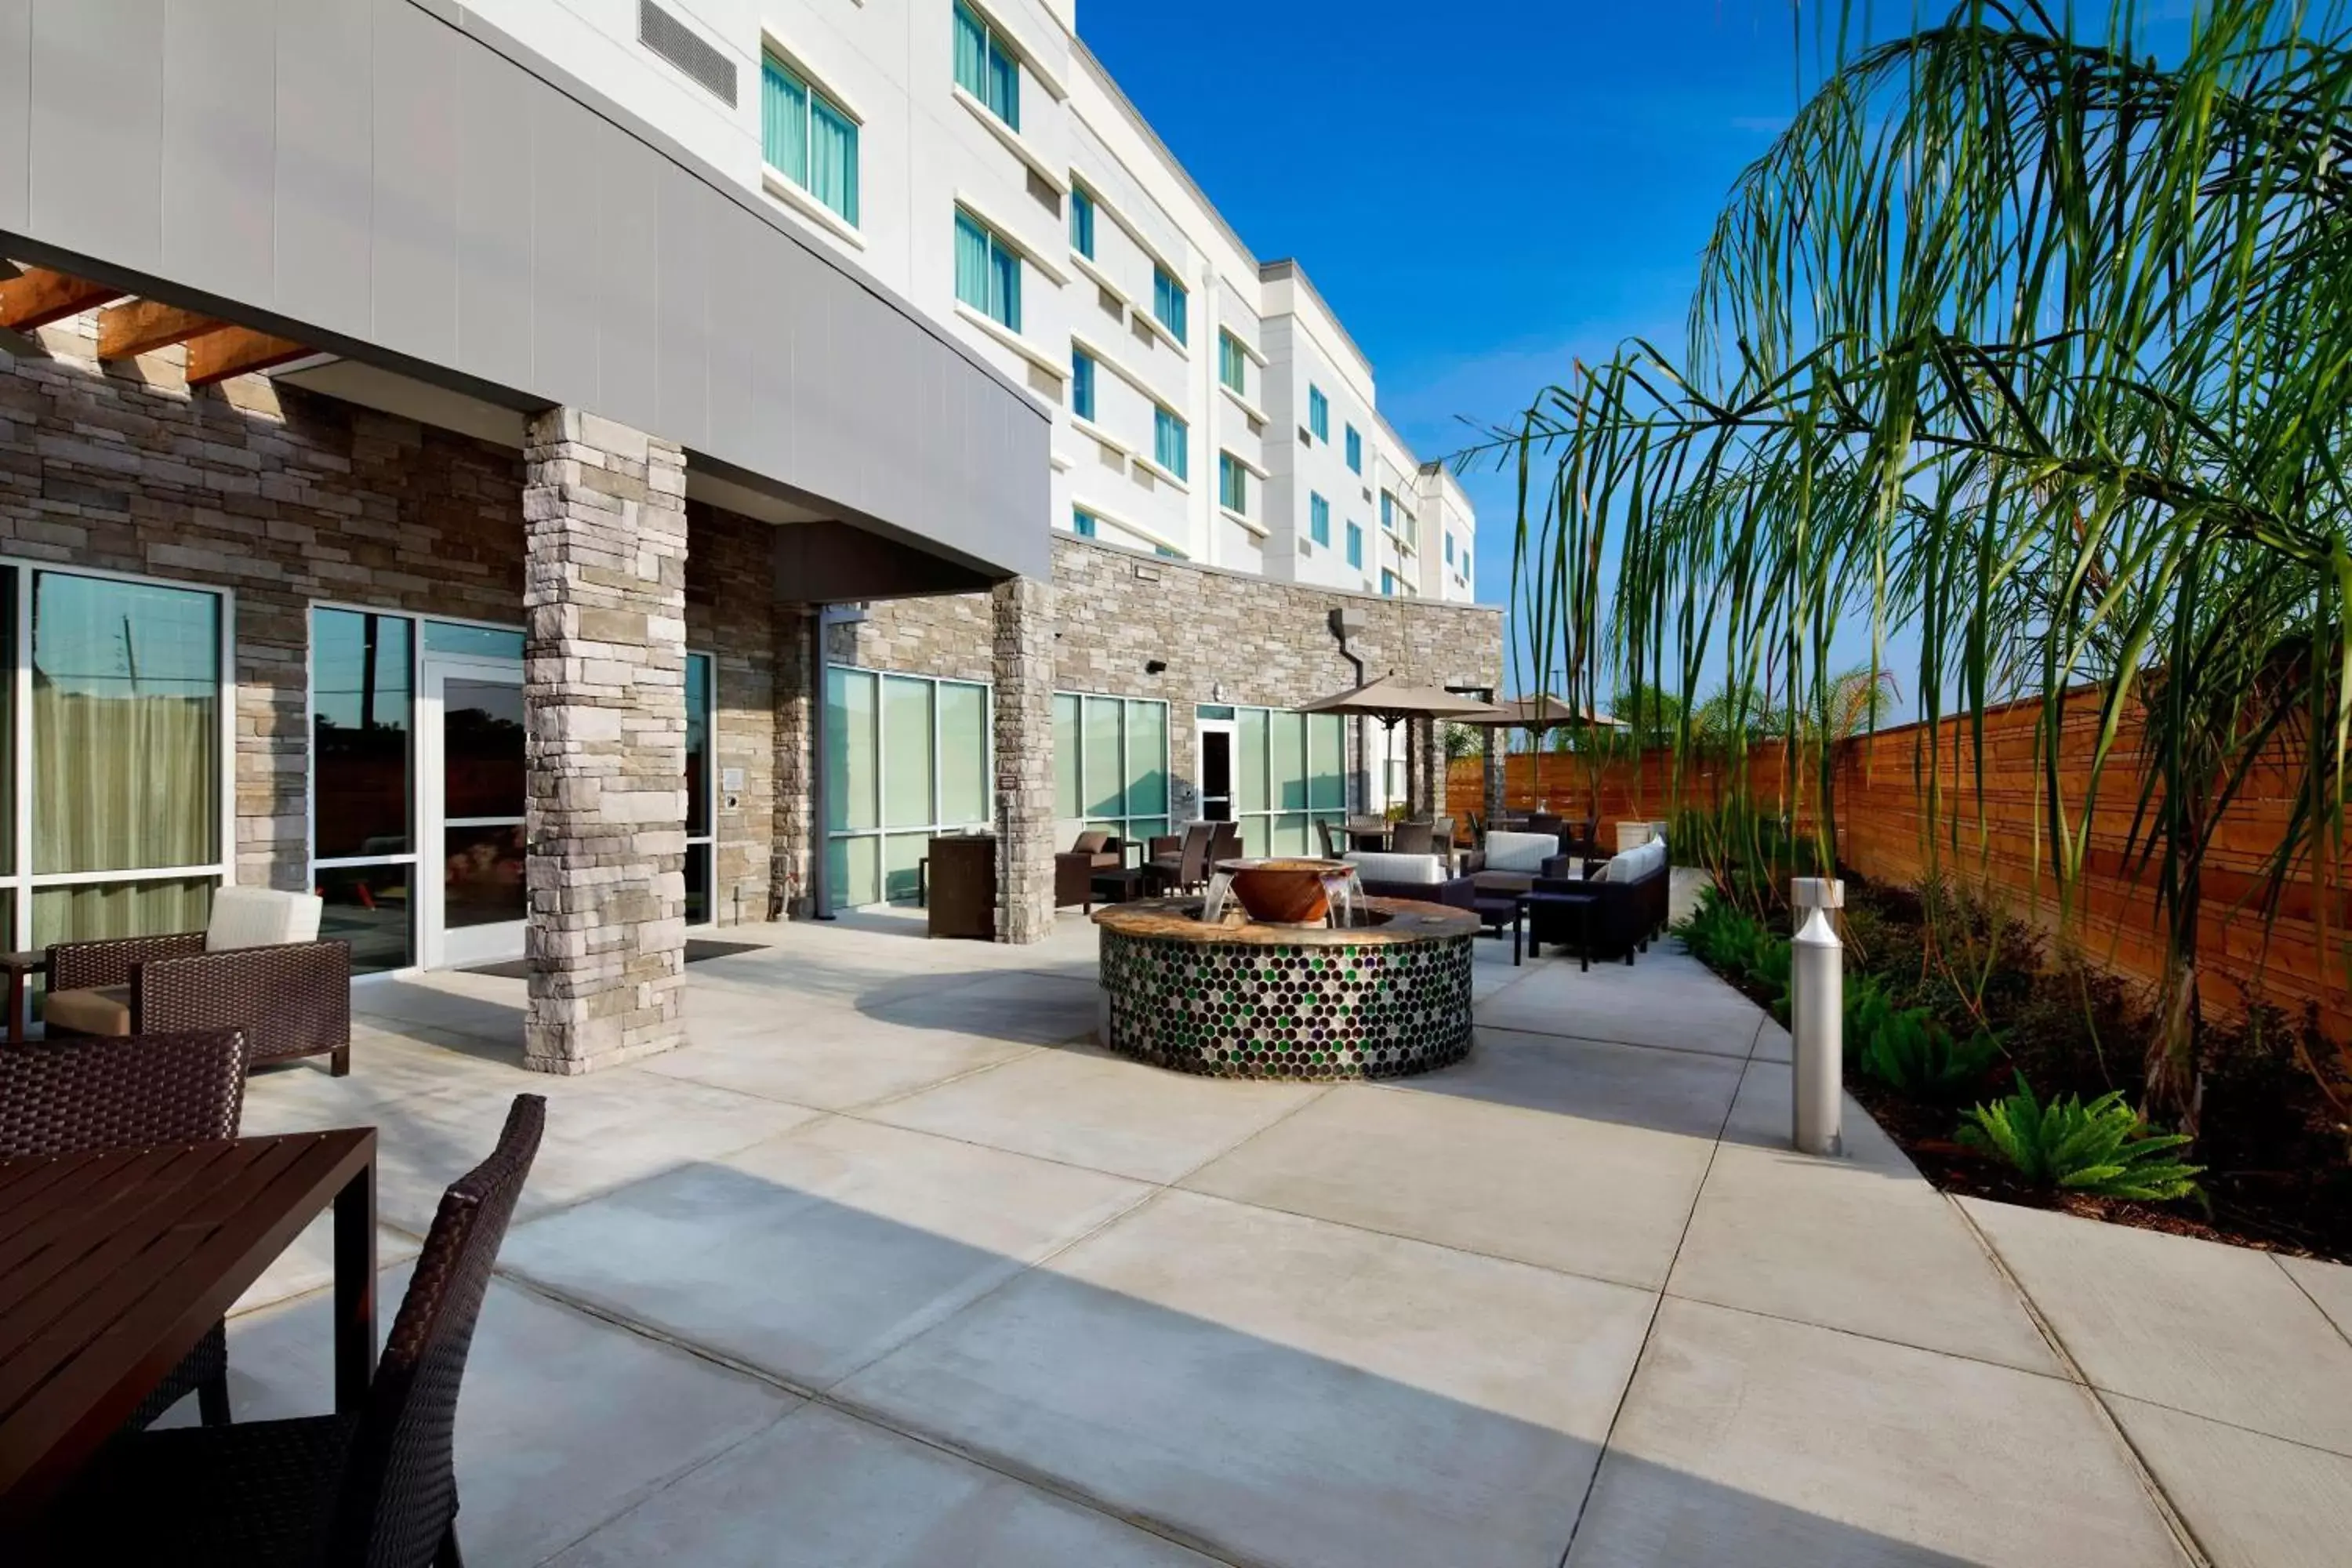 Property building in Courtyard by Marriott Houston Intercontinental Airport